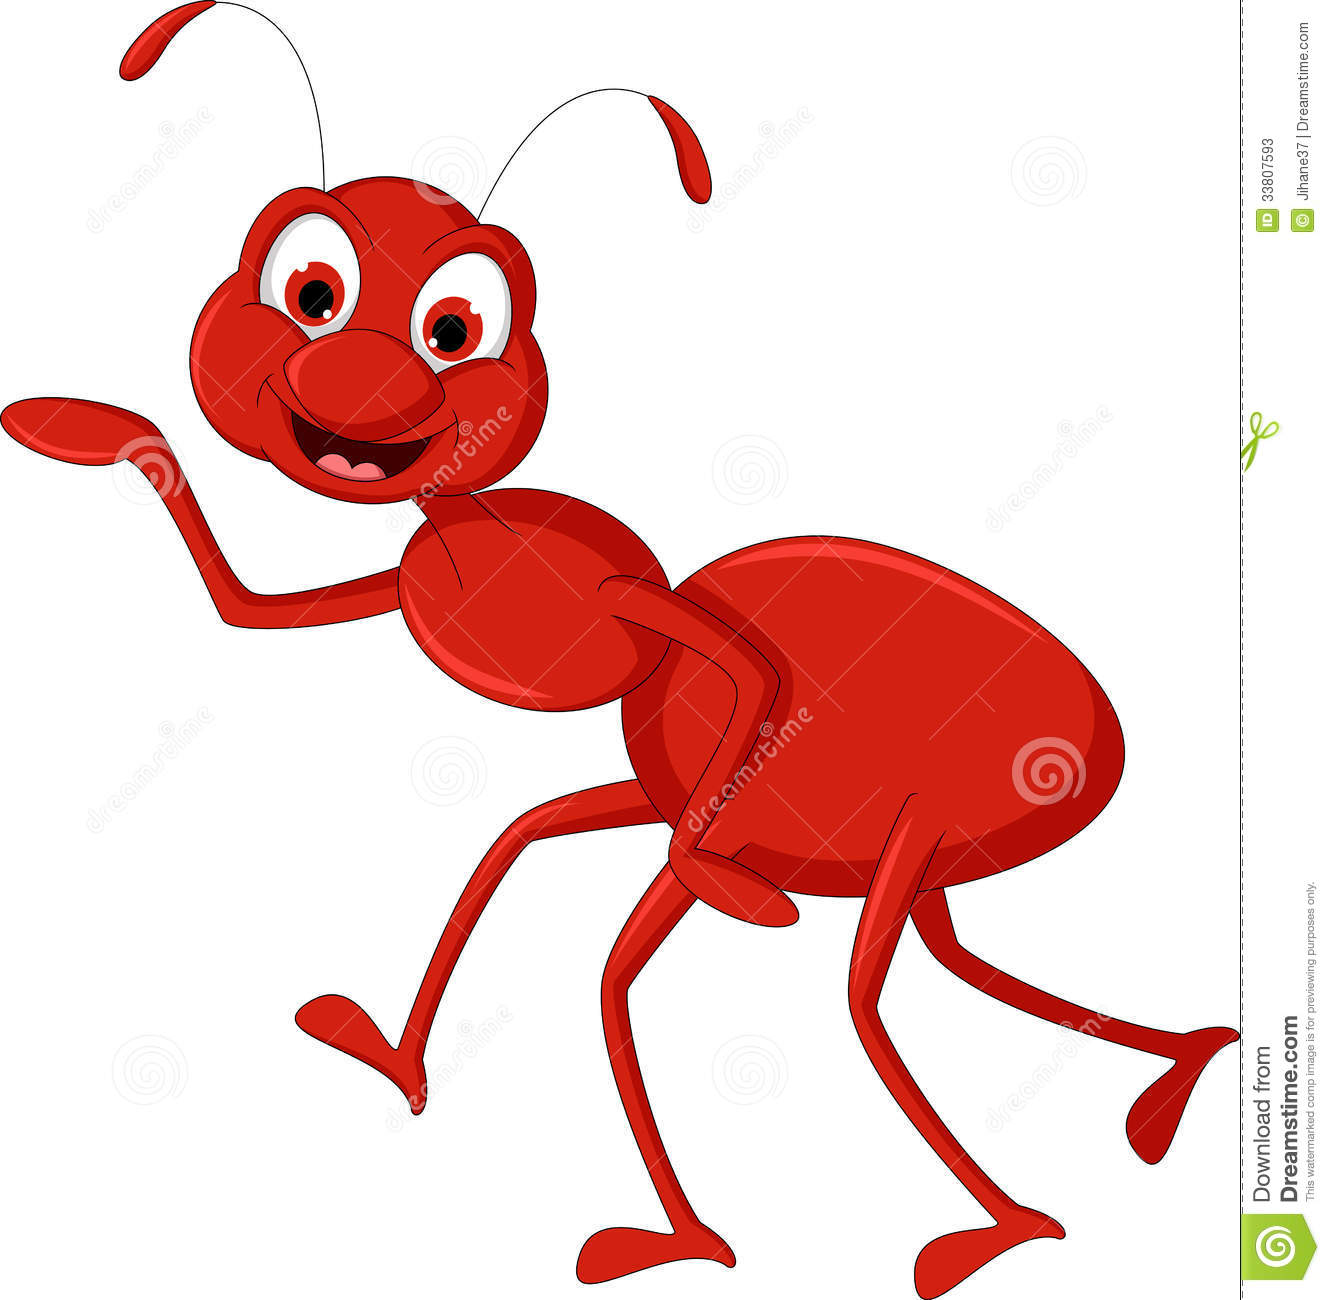 Red Ant Cartoon Presenting For You Design Stock Photos   Image